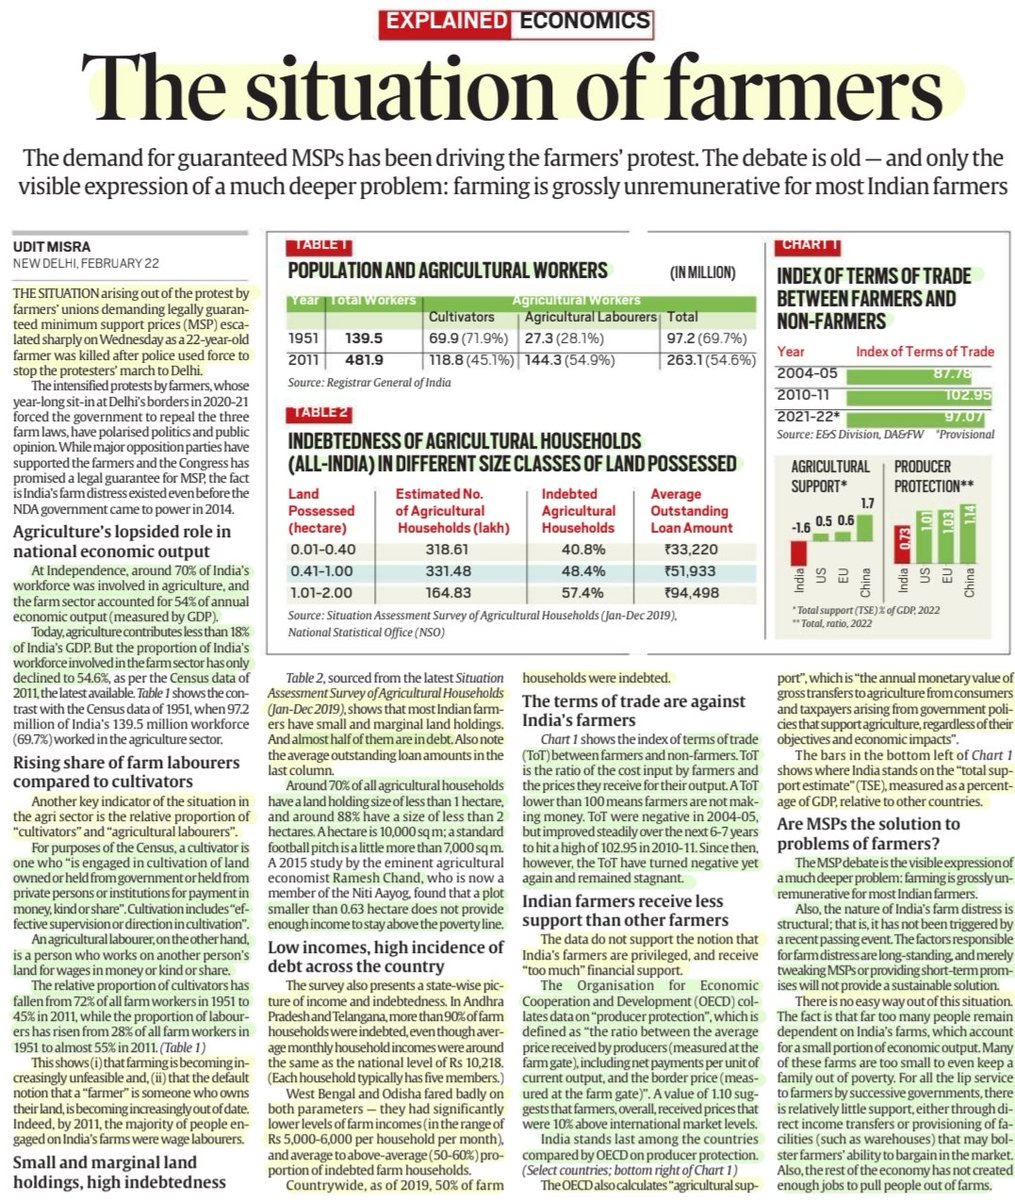 'The Situation of Farmers'

:Well explained by Sh Udit Misra
@ieuditmisra 

Details:Abt #MSP ,its need, #agriculture dependence & contribution to #GDP,#Farmers issues #Debt ,Possible solutions &
More info

#farmersprotests2024
#Cultivators #Workers #WageLabourers

#UPSC
Source:IE